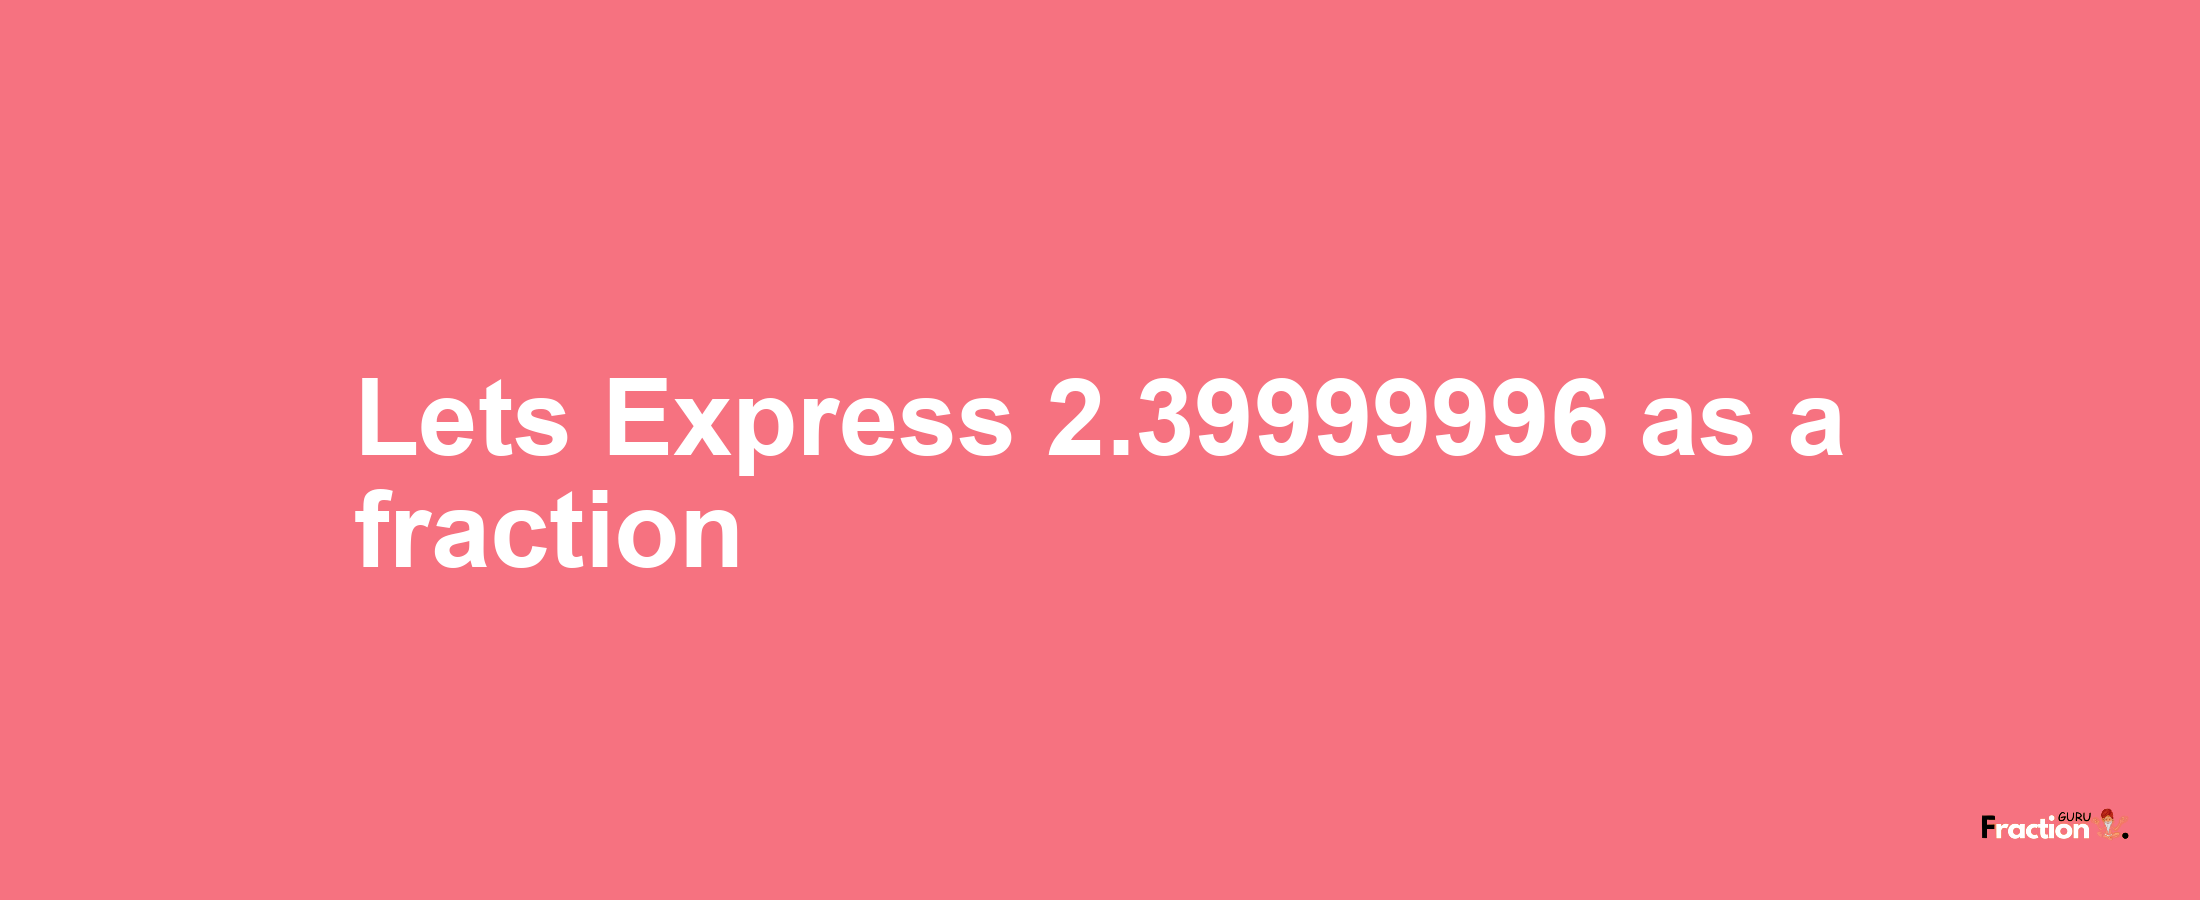 Lets Express 2.39999996 as afraction